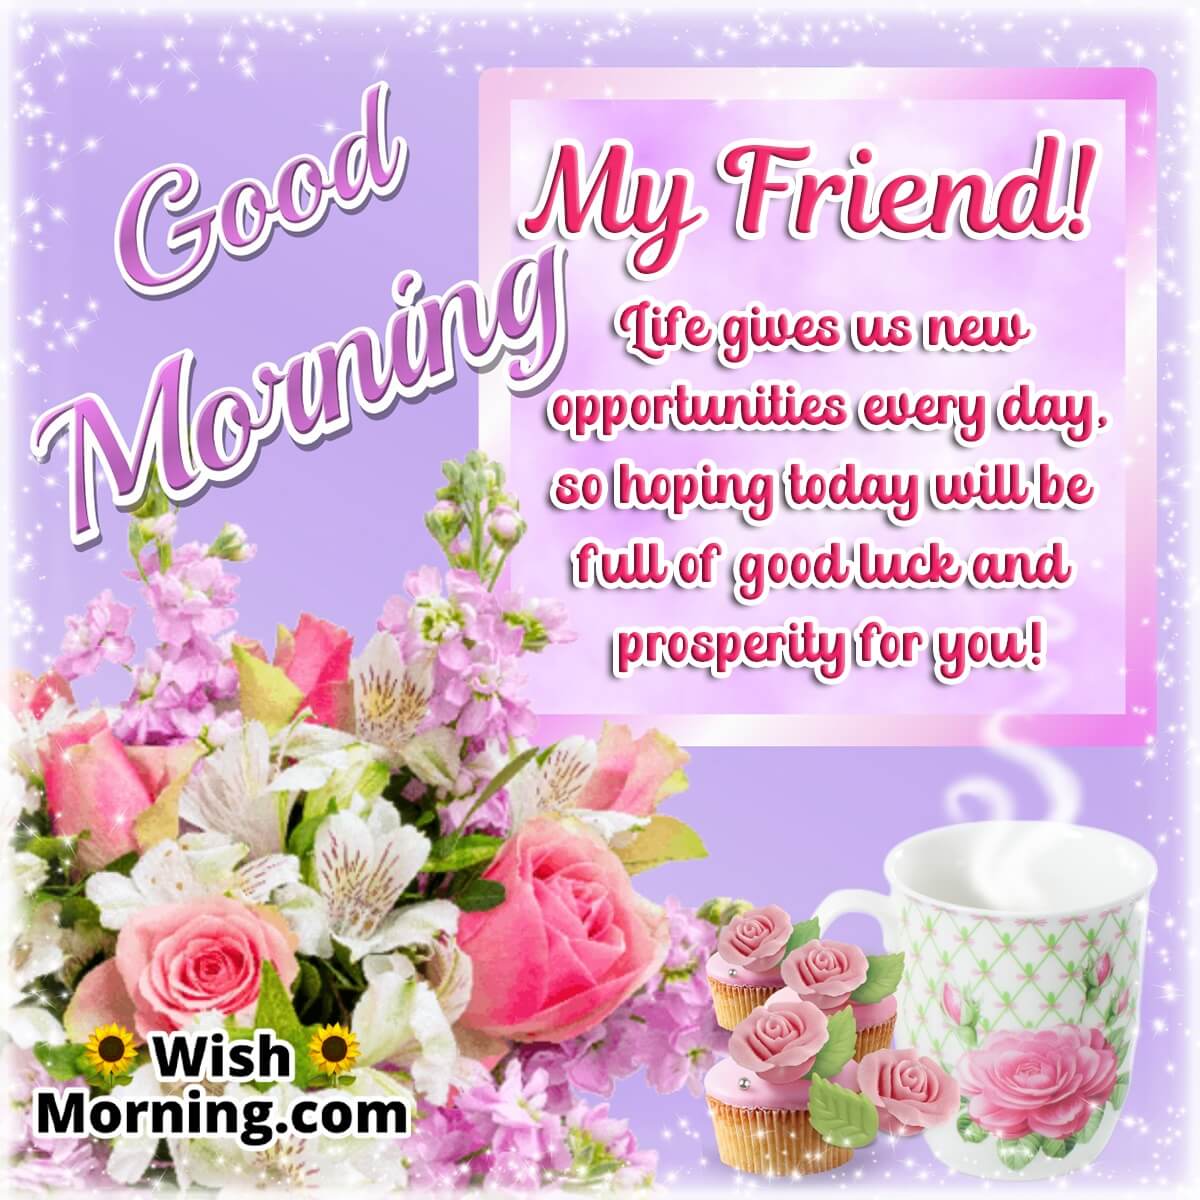 Good Morning Wishes To Friend